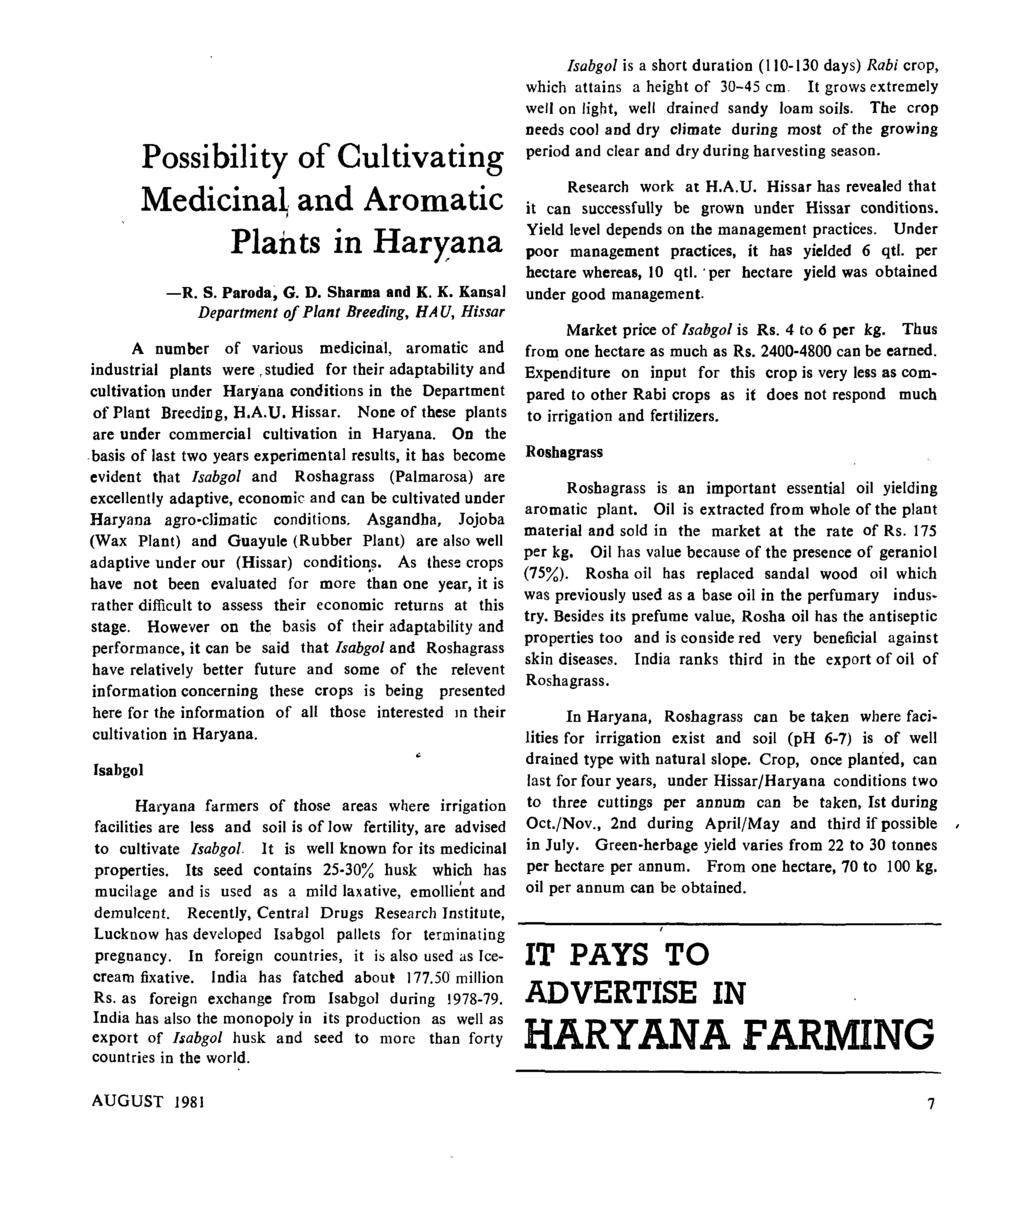 Possibility of Cultivating Medicinal, and Aromatic Plants in Haryana -R. S. Paroda~ G. D. Sharma and K.